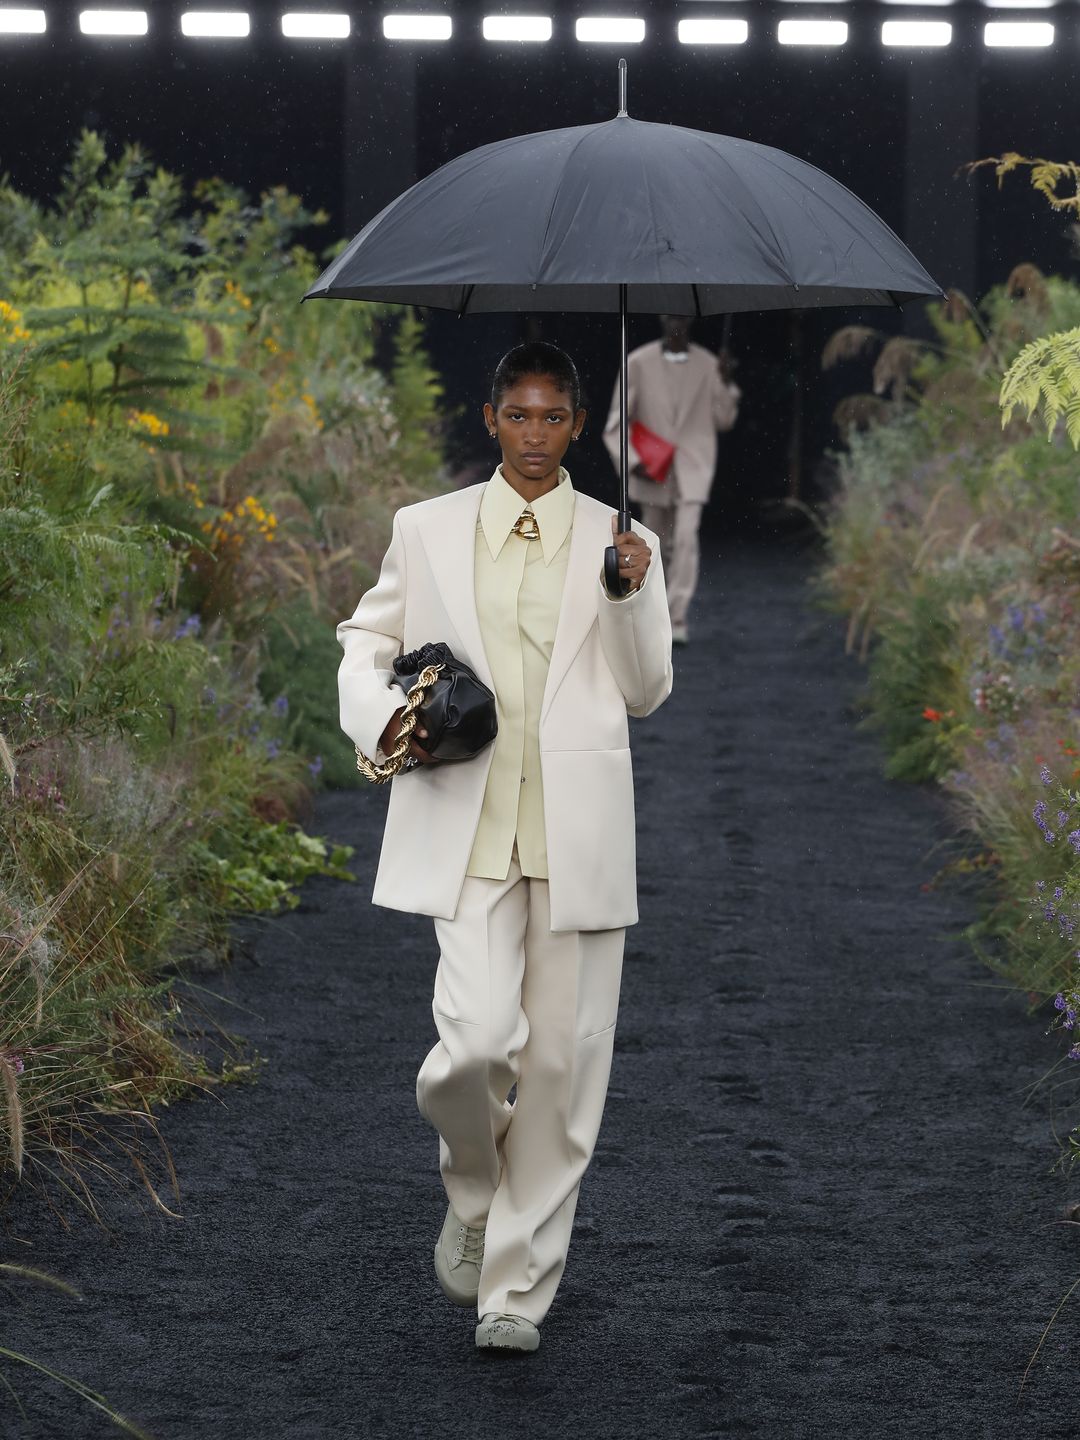 The Jil Sander SS23 show gave us a lesson in chic dressing in the rain